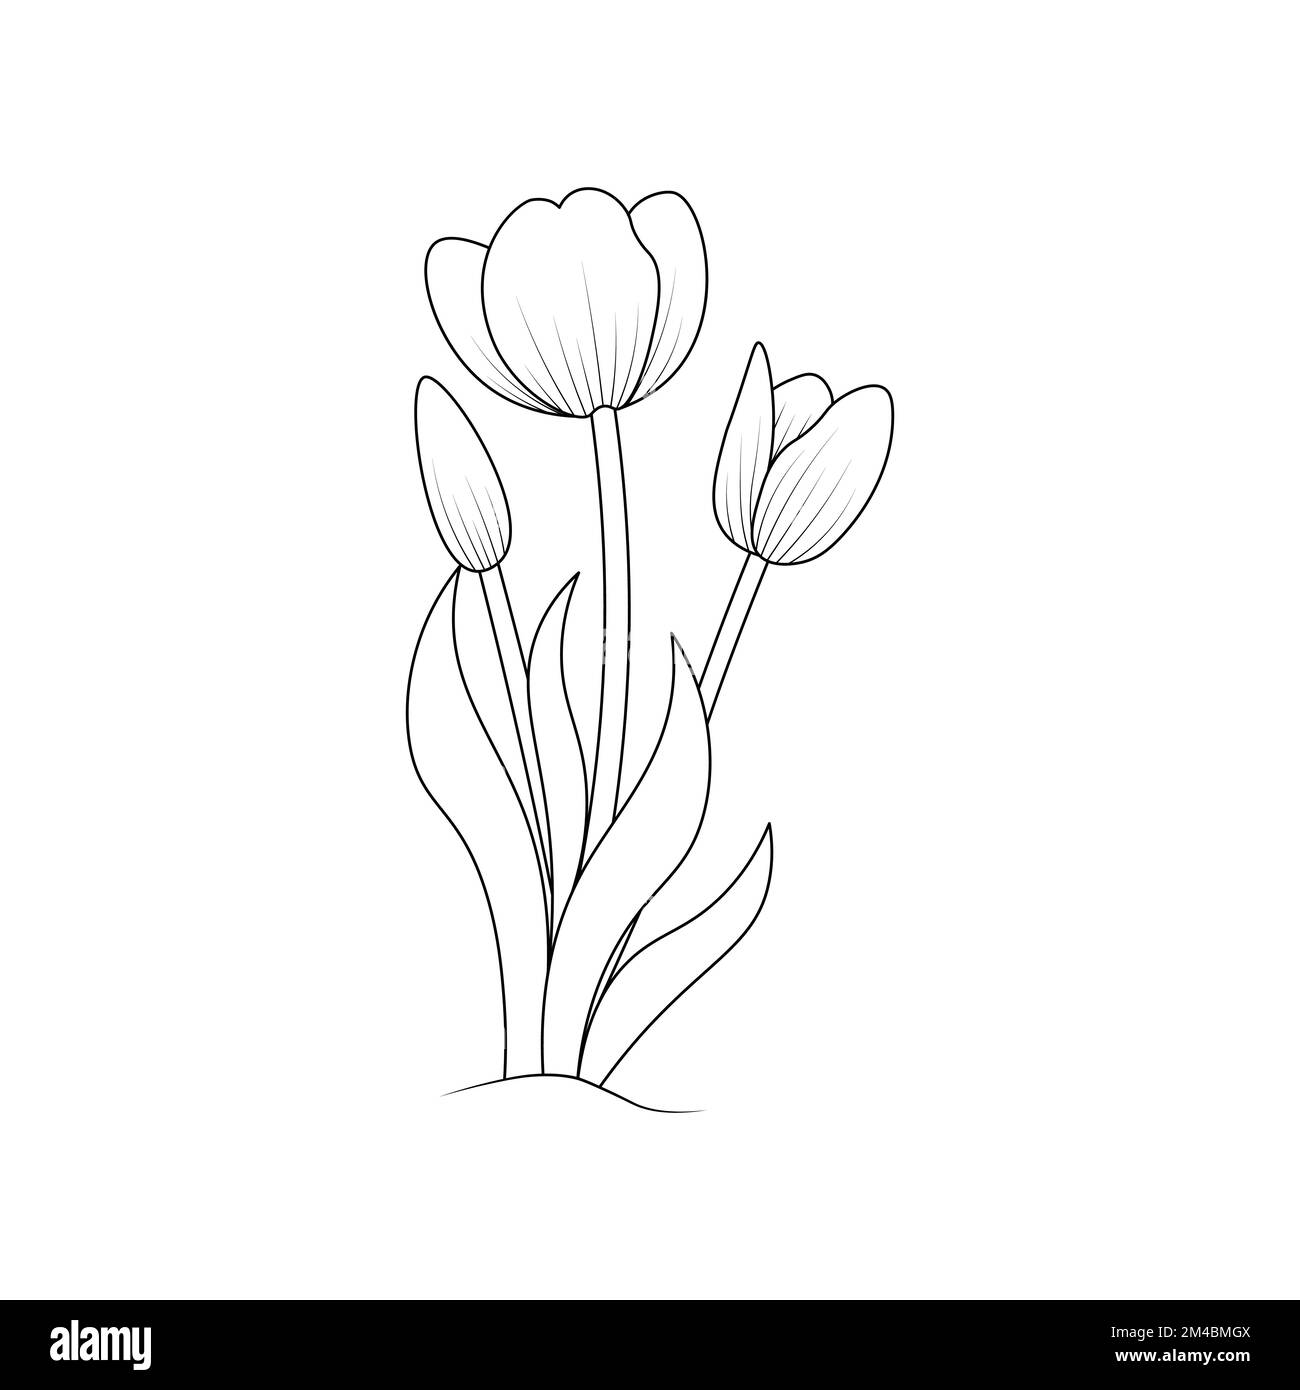 Drooping flower Black and White Stock Photos & Images - Alamy